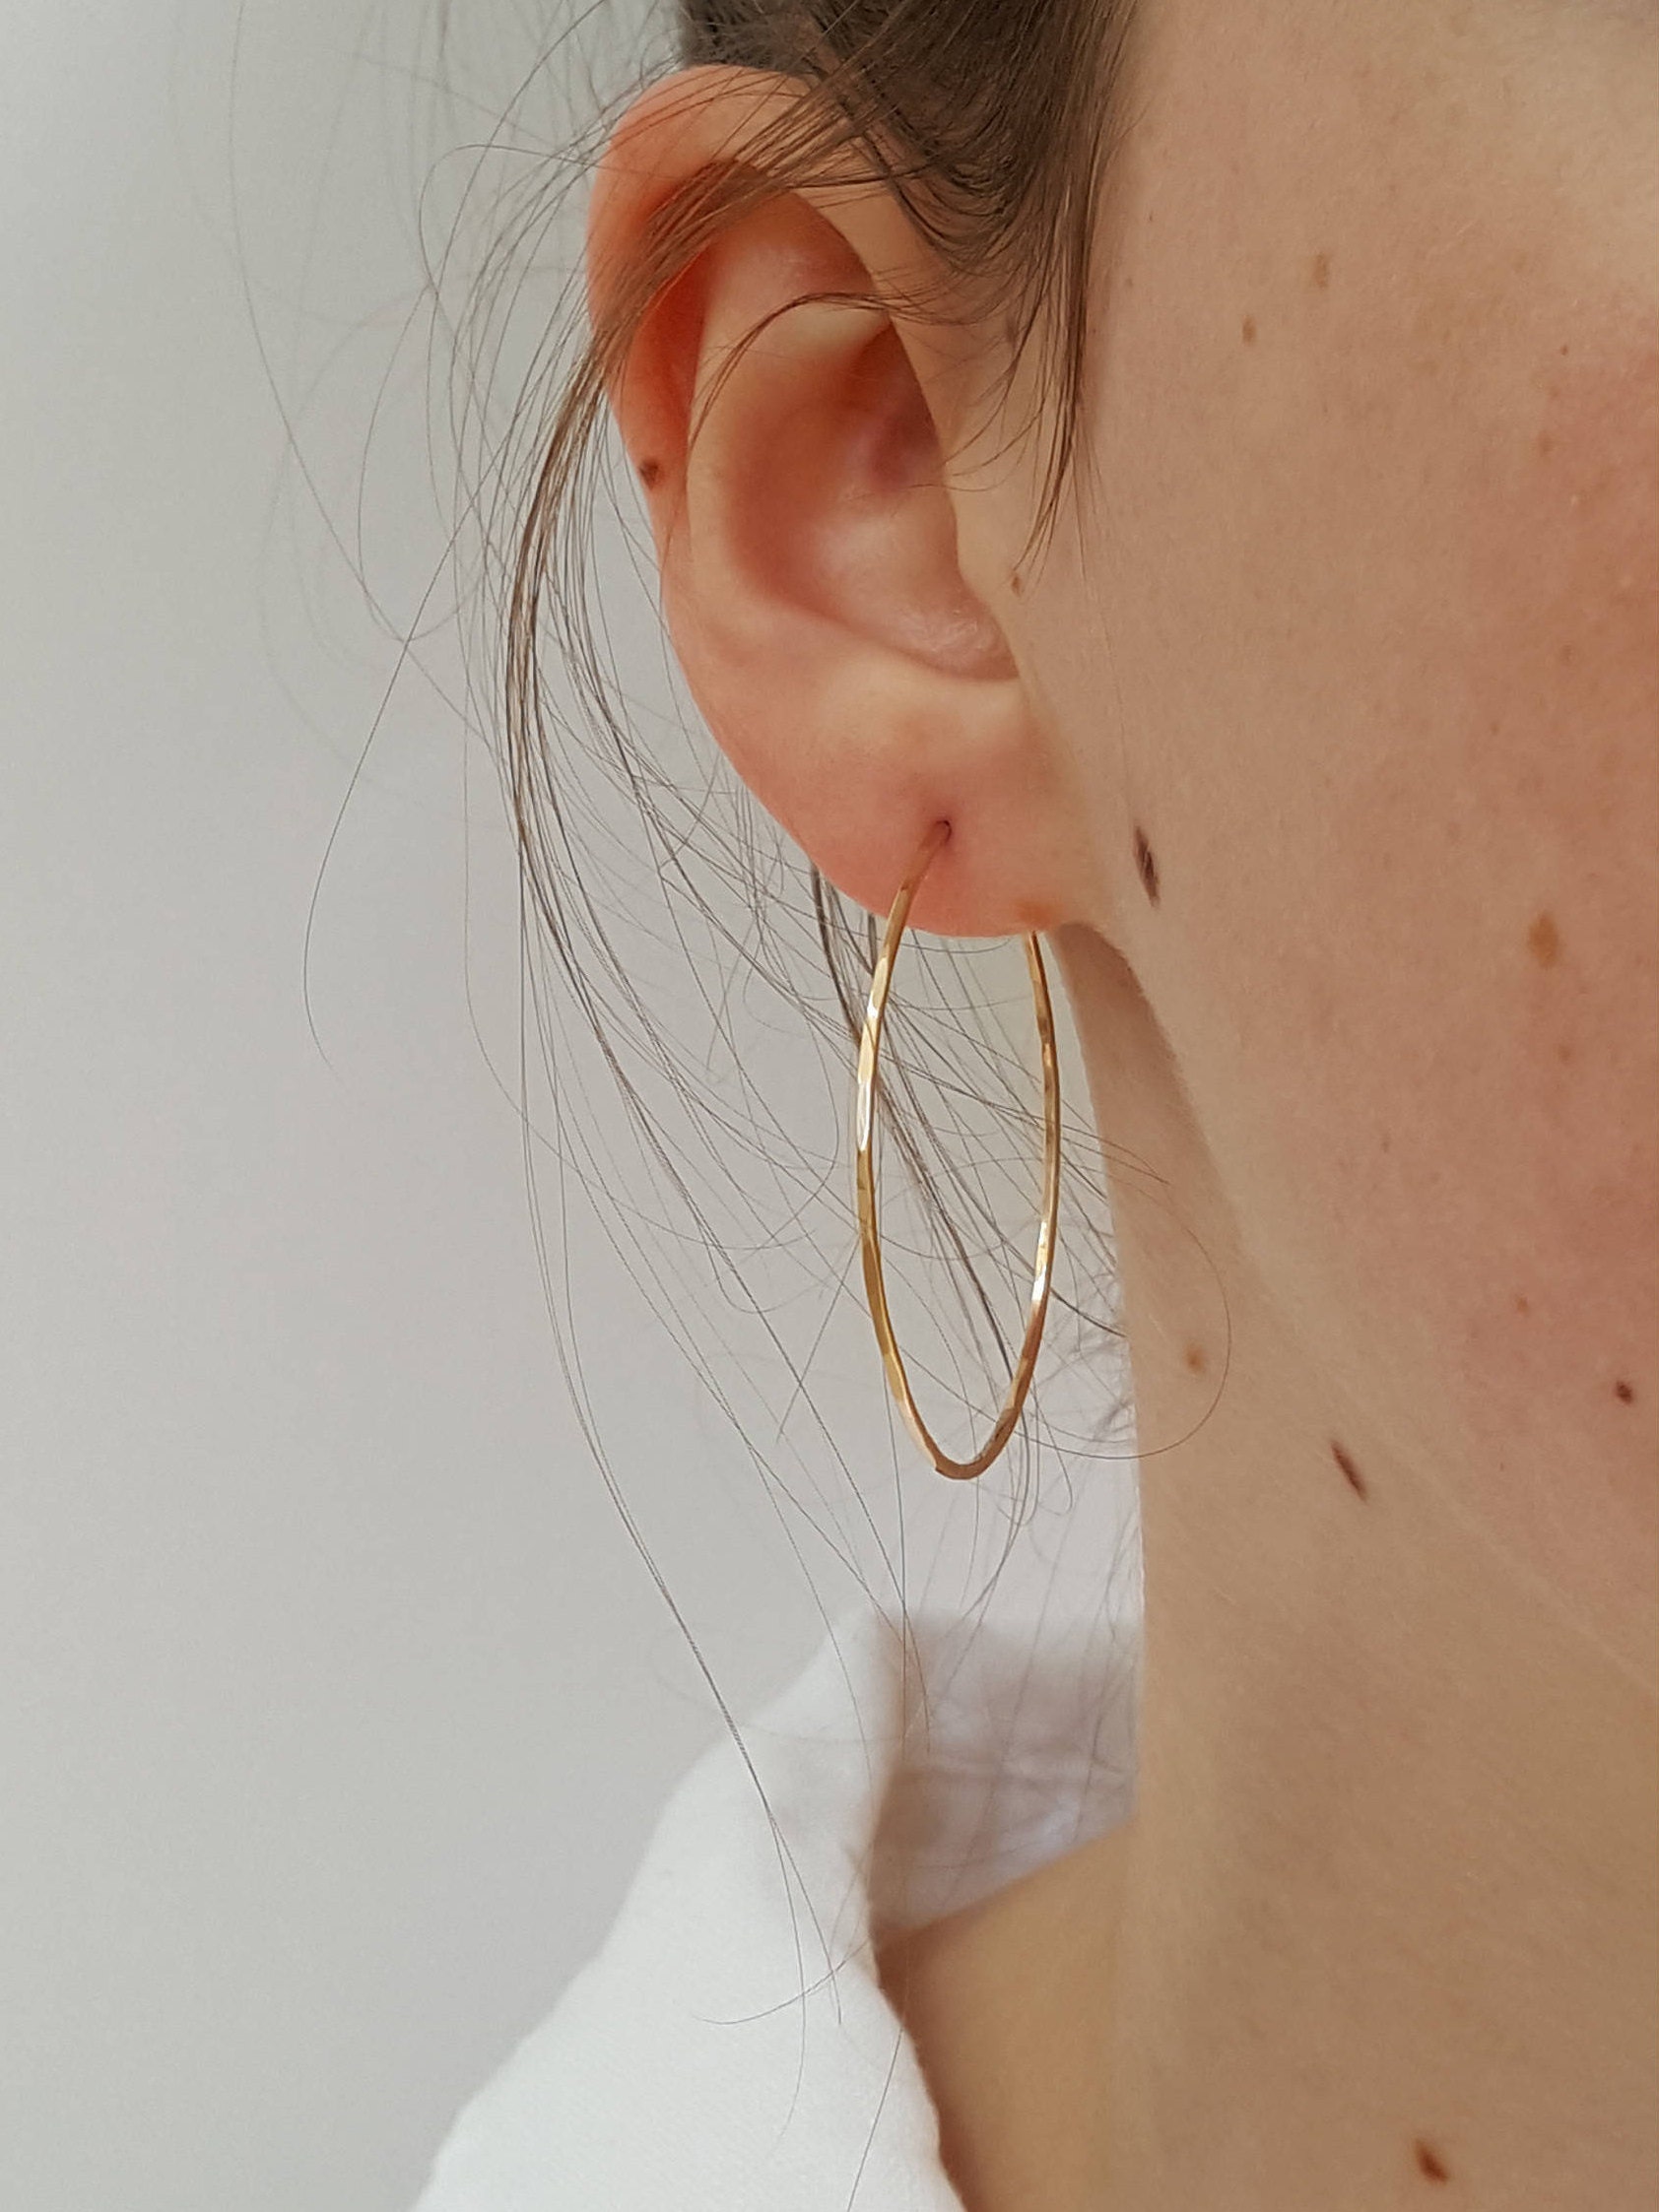 14 Different Types of Earrings That's Popular | NextBuye